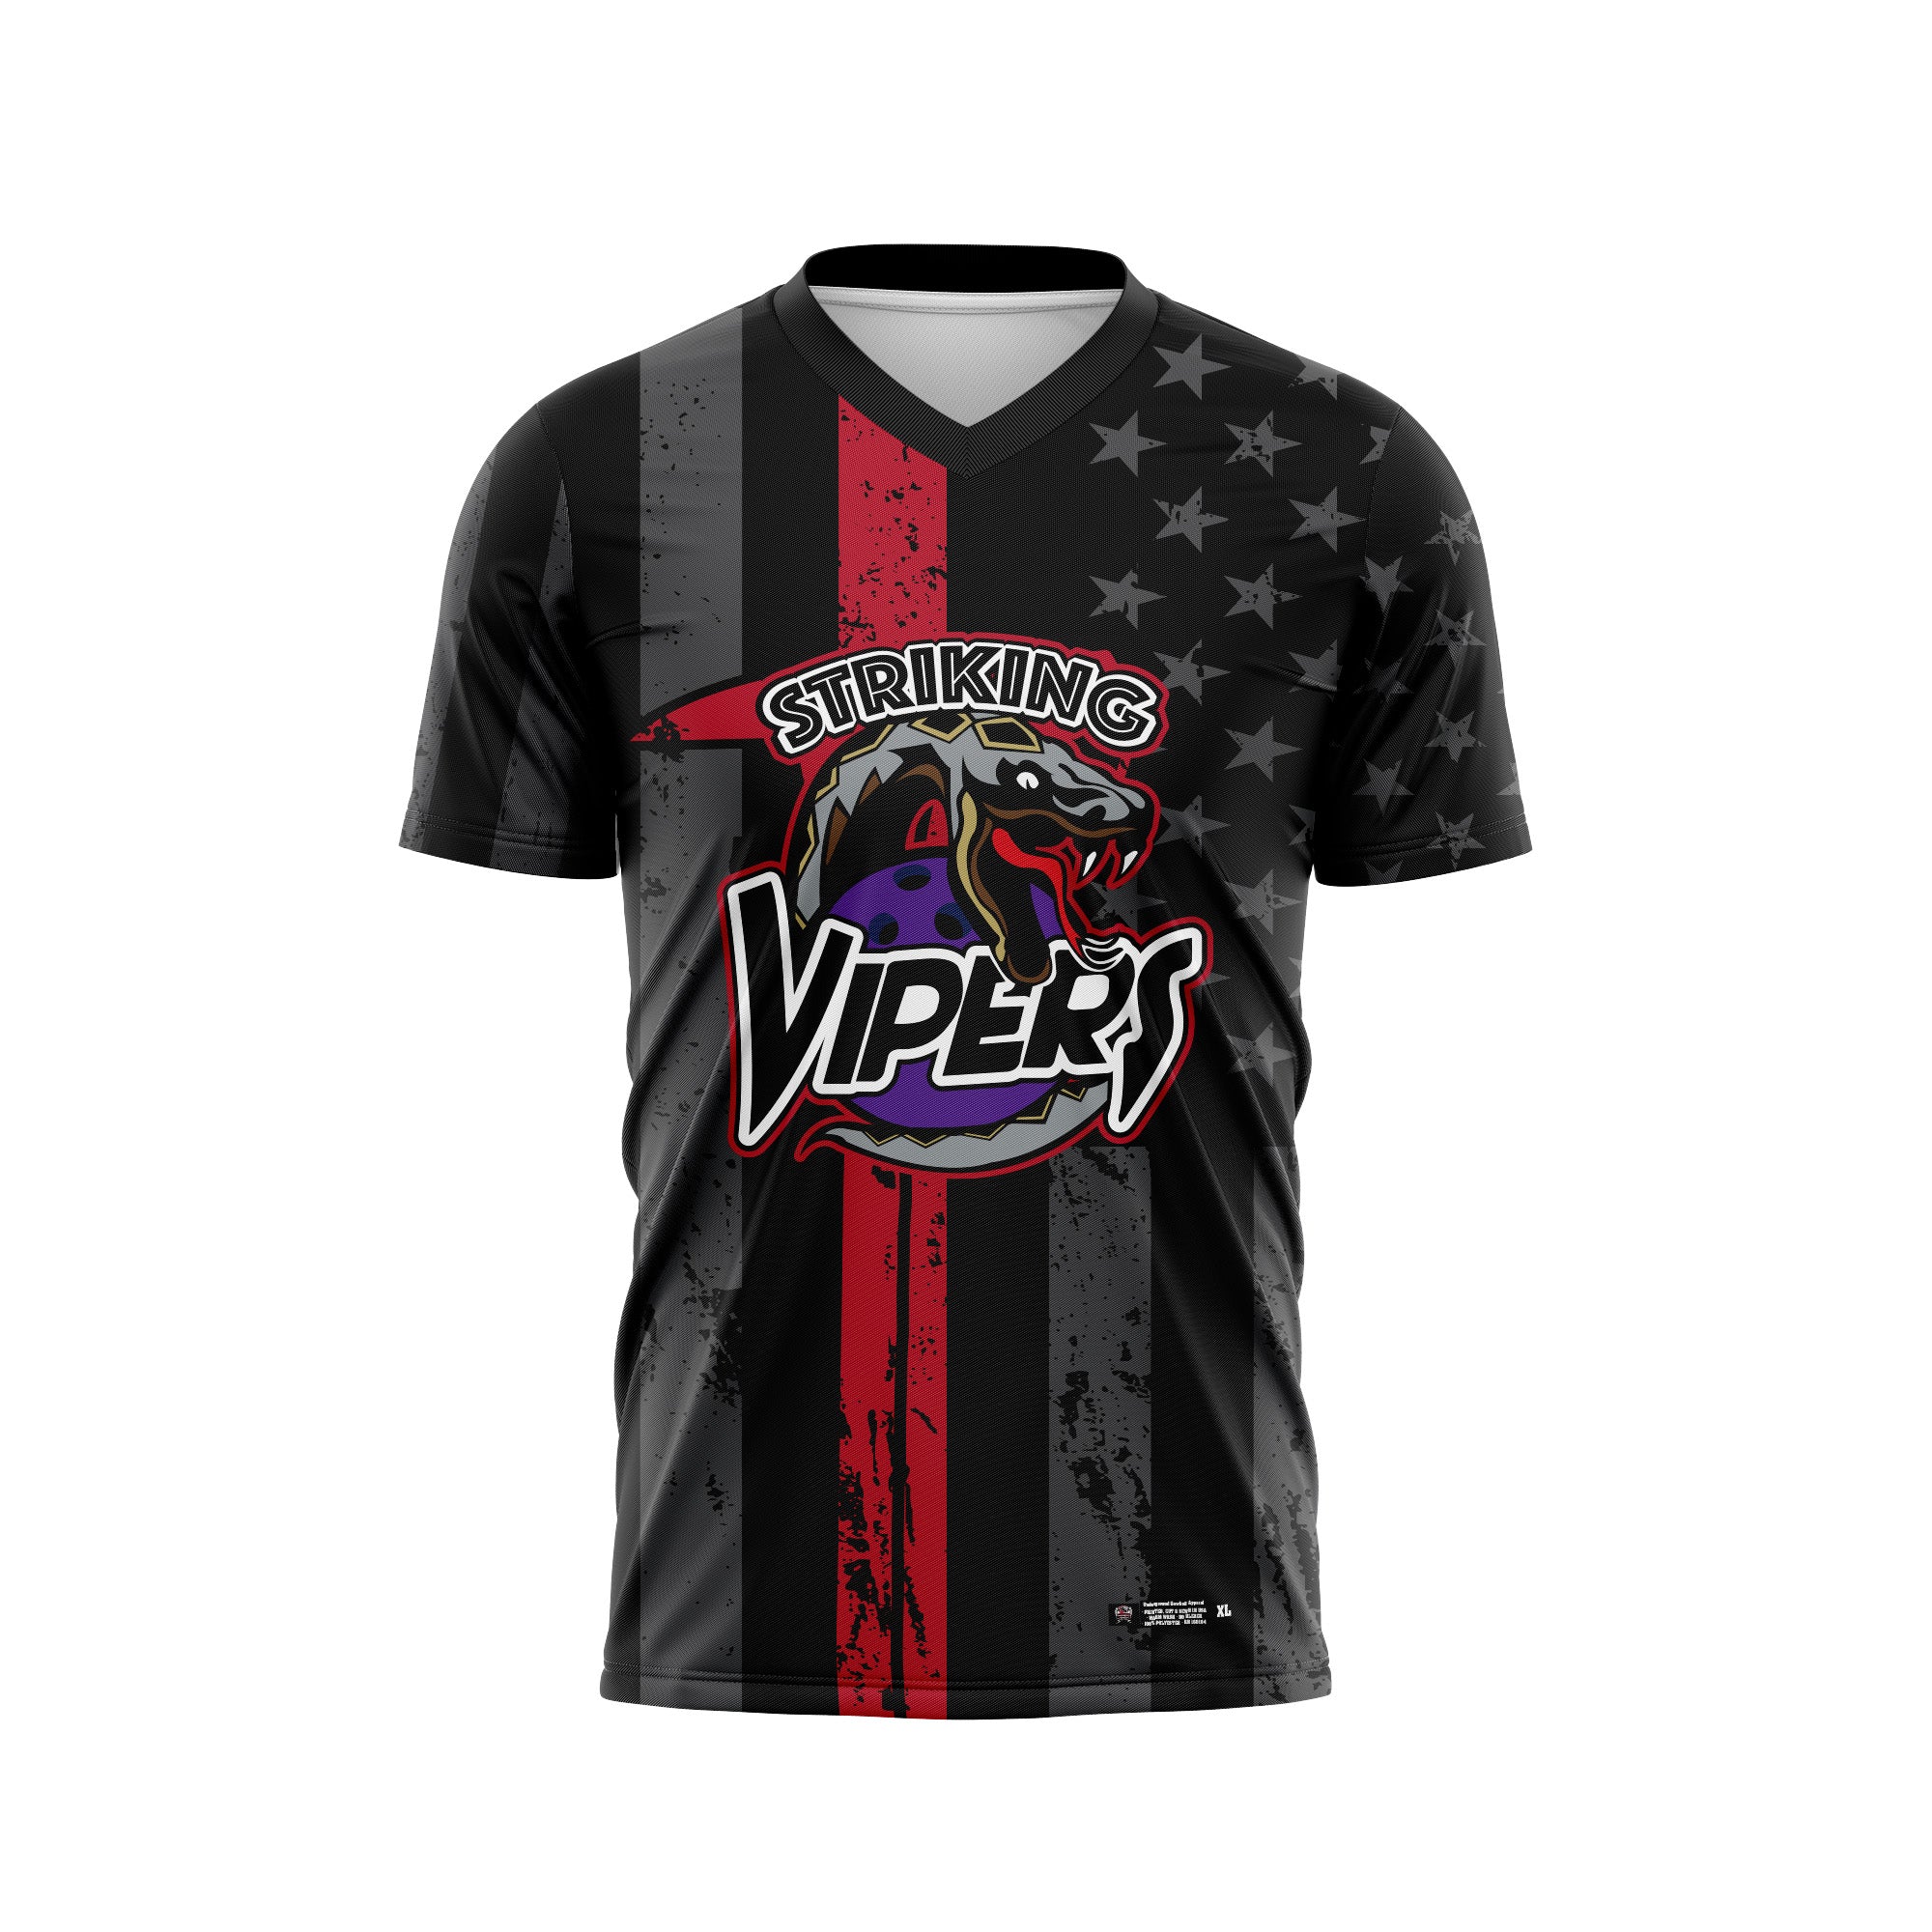 Striking Vipers Black / Red Jersey